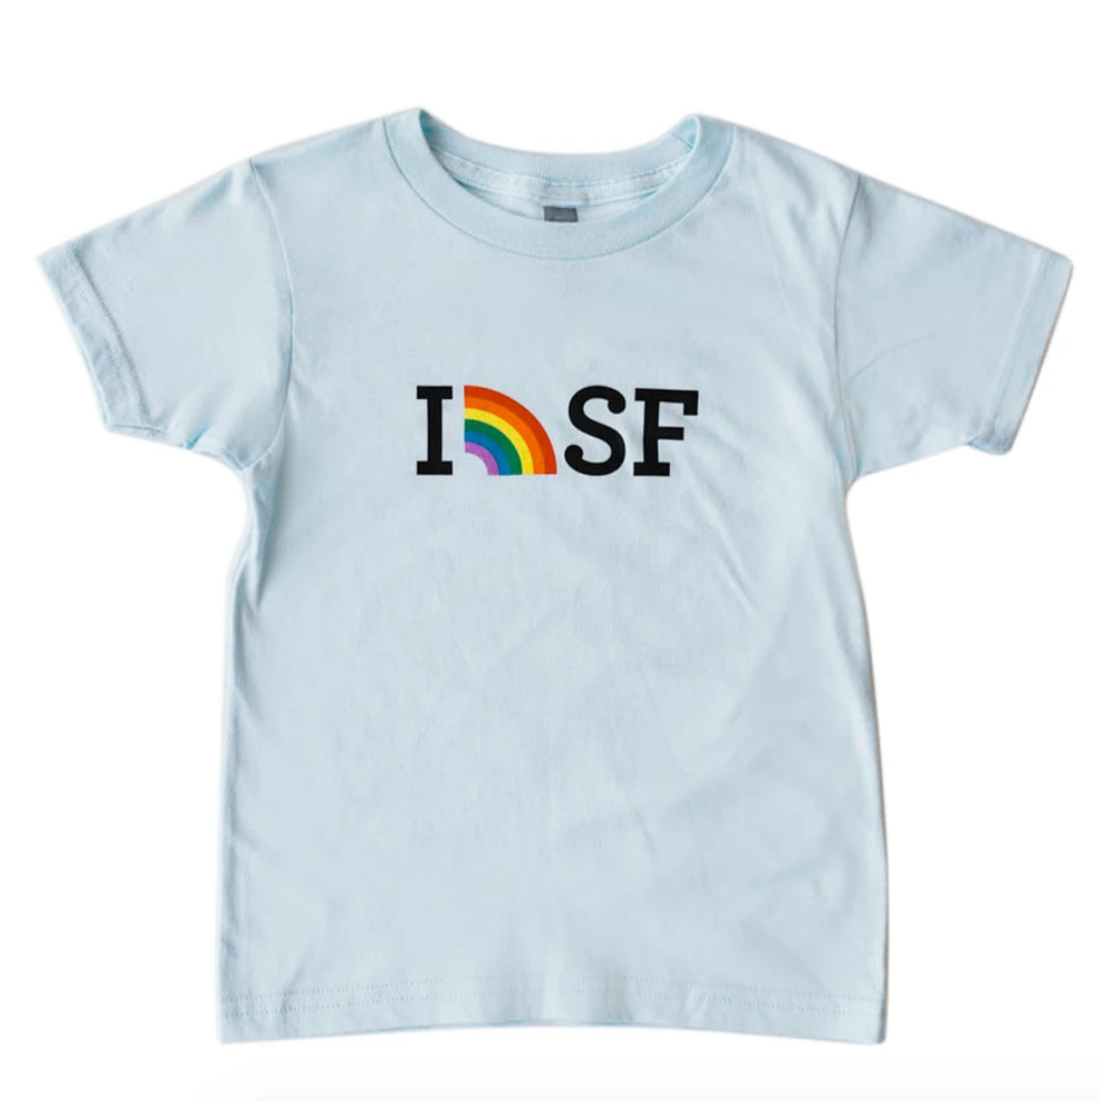 this is a light blue  shirt with an I rainbow SF printed across the chest